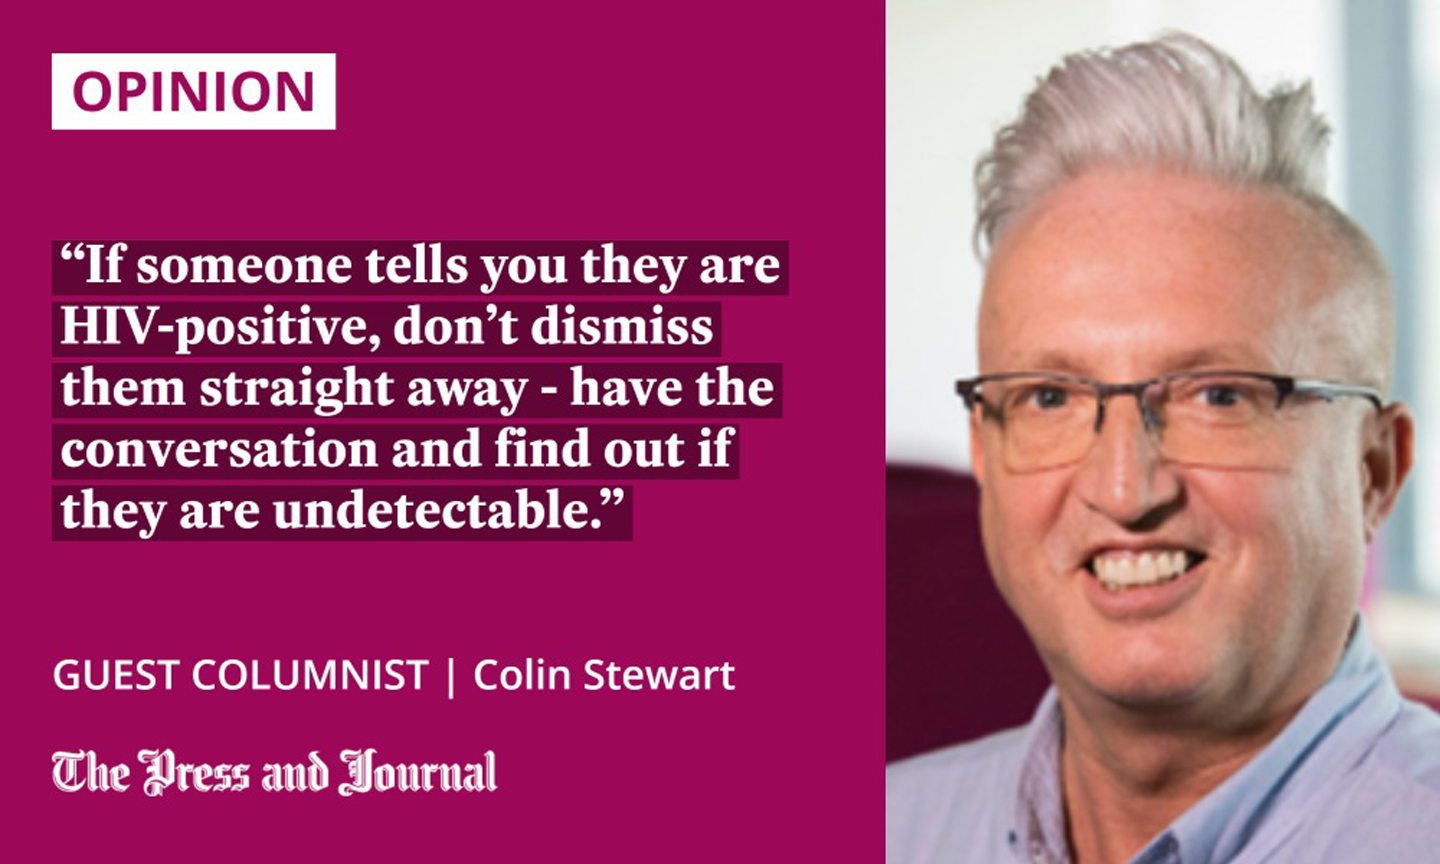 Guest Columnist, Colin Stewart, talking about how do you get HIV: "If someone tells you they are HIV-positive, don’t dismiss them straight away - have the conversation and find out if they are undetectable."